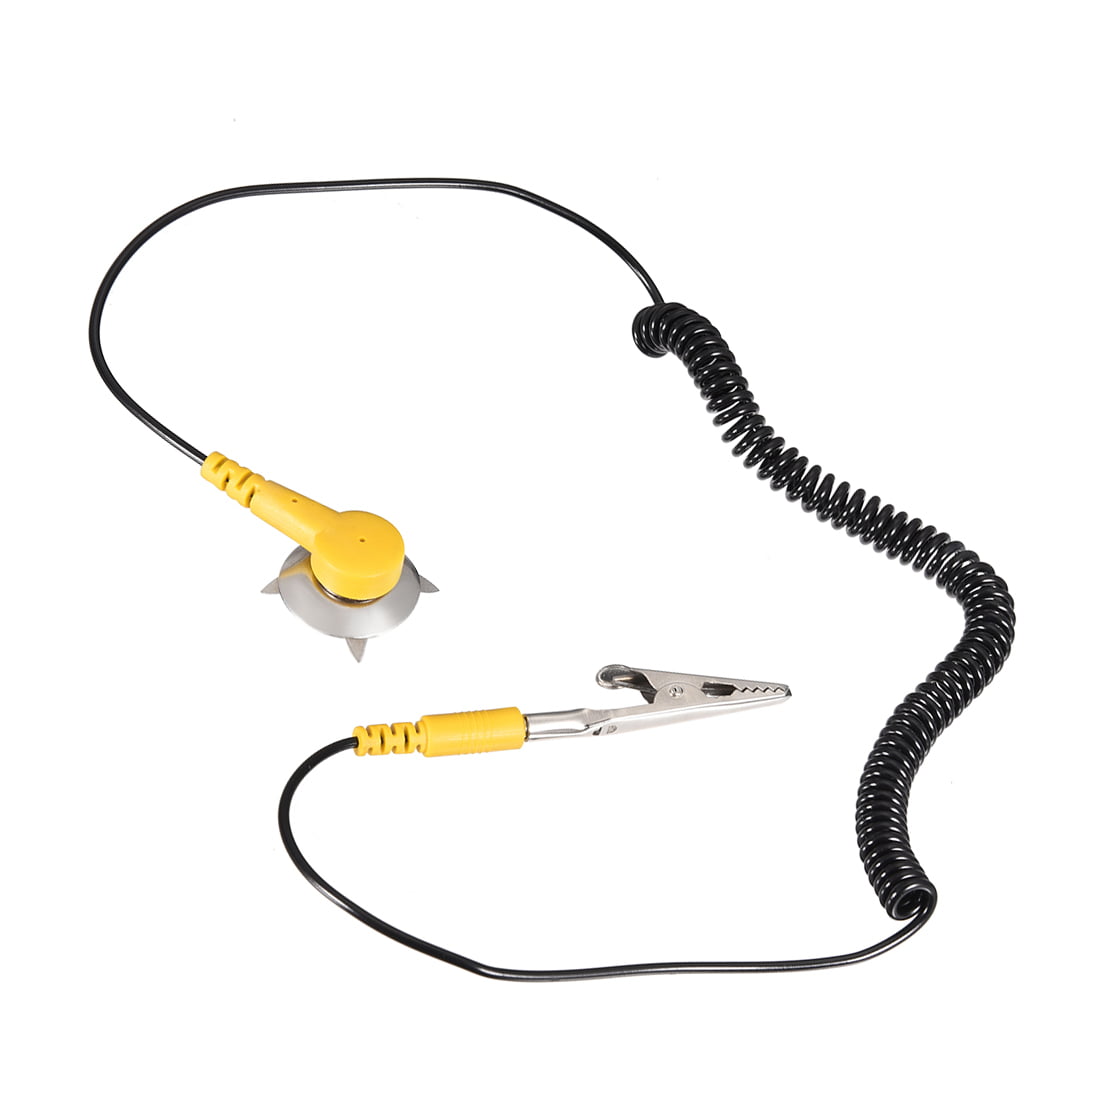 with Alligator Clip Claw and PU Grounding Wire 4pcs uxcell Anti-Static ESD Grounding Cable Coiled Cord 